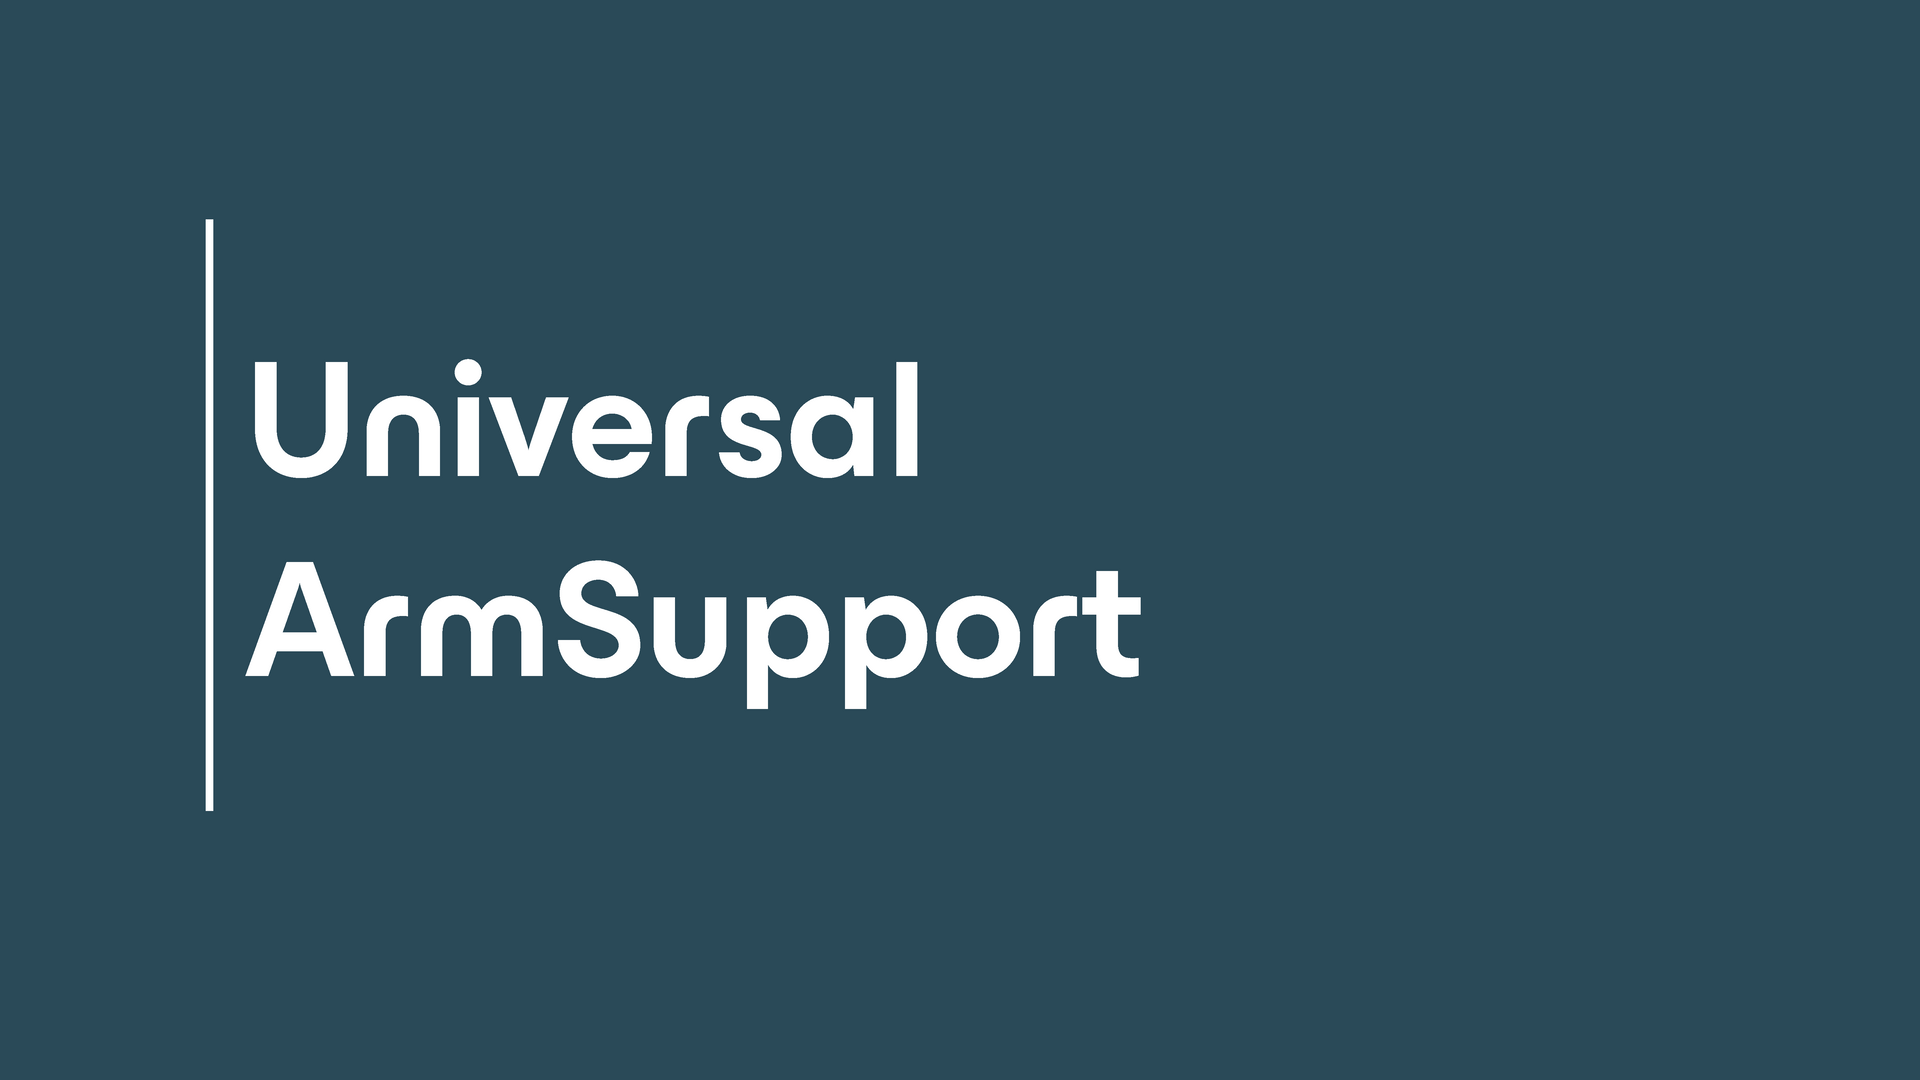 The Universal Armsupport tile